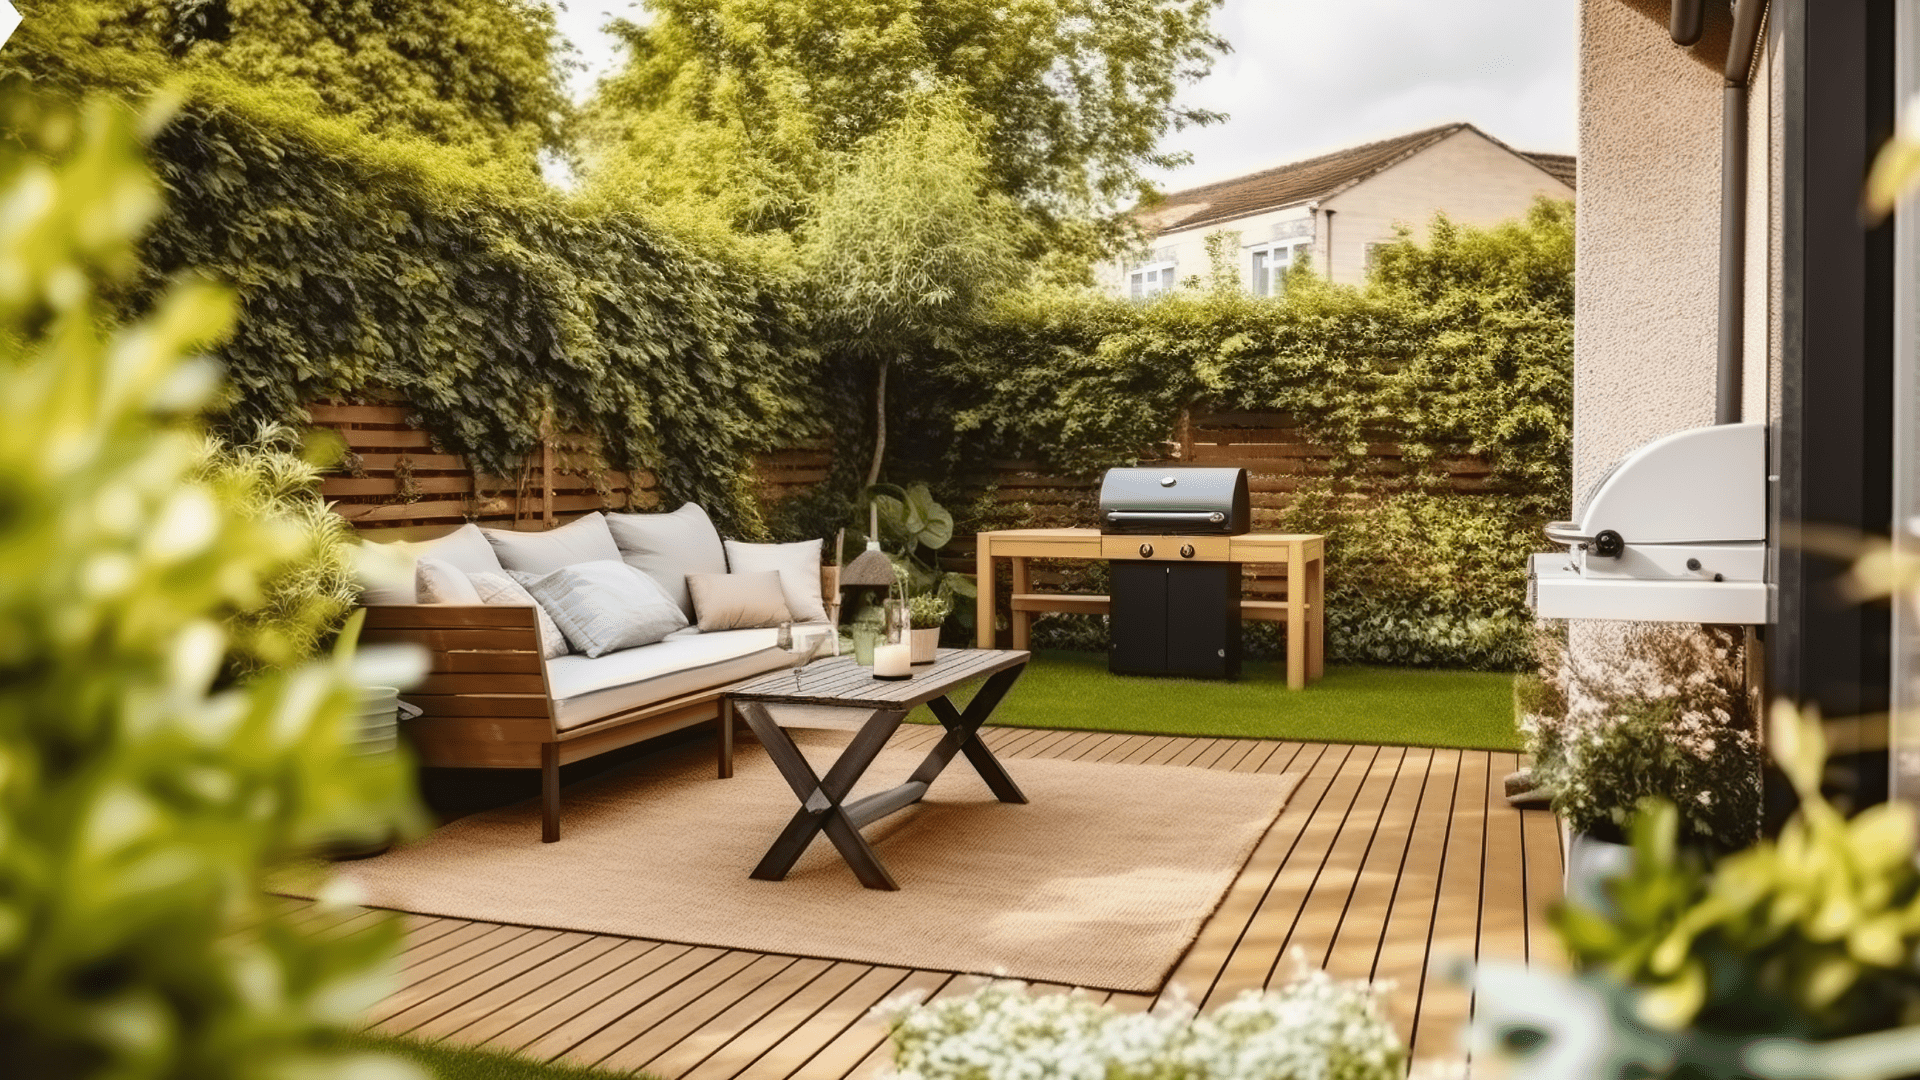 Creative Deck Design Ideas for Small Yards